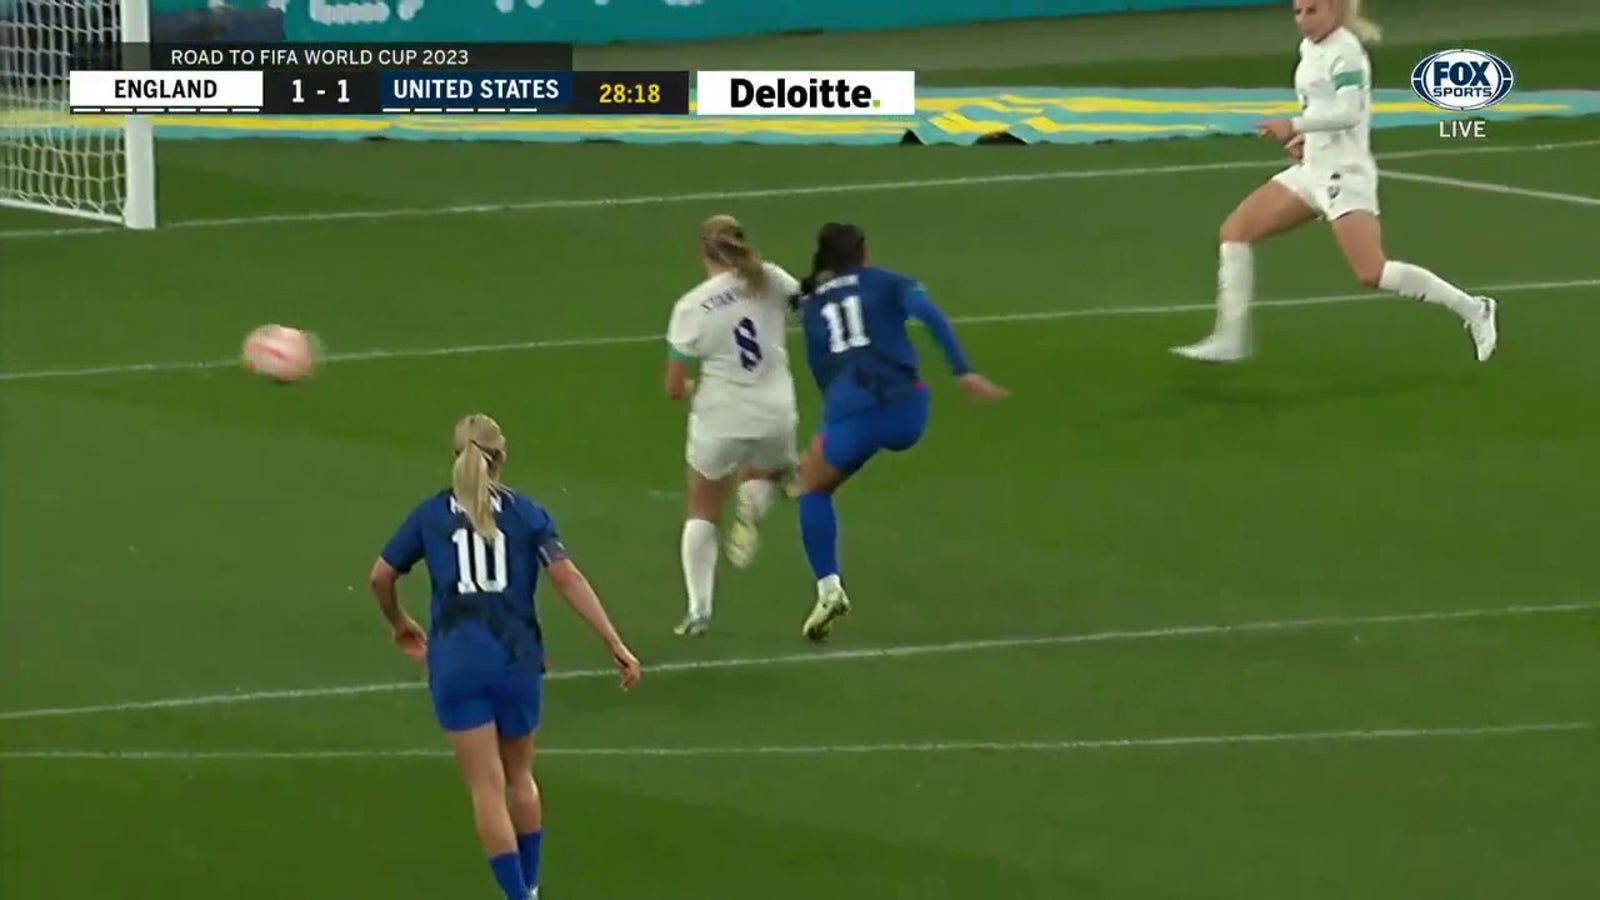 Sophia Smith scores after capitalizing on a costly turnover and brings the US to a 1-1 tie with England